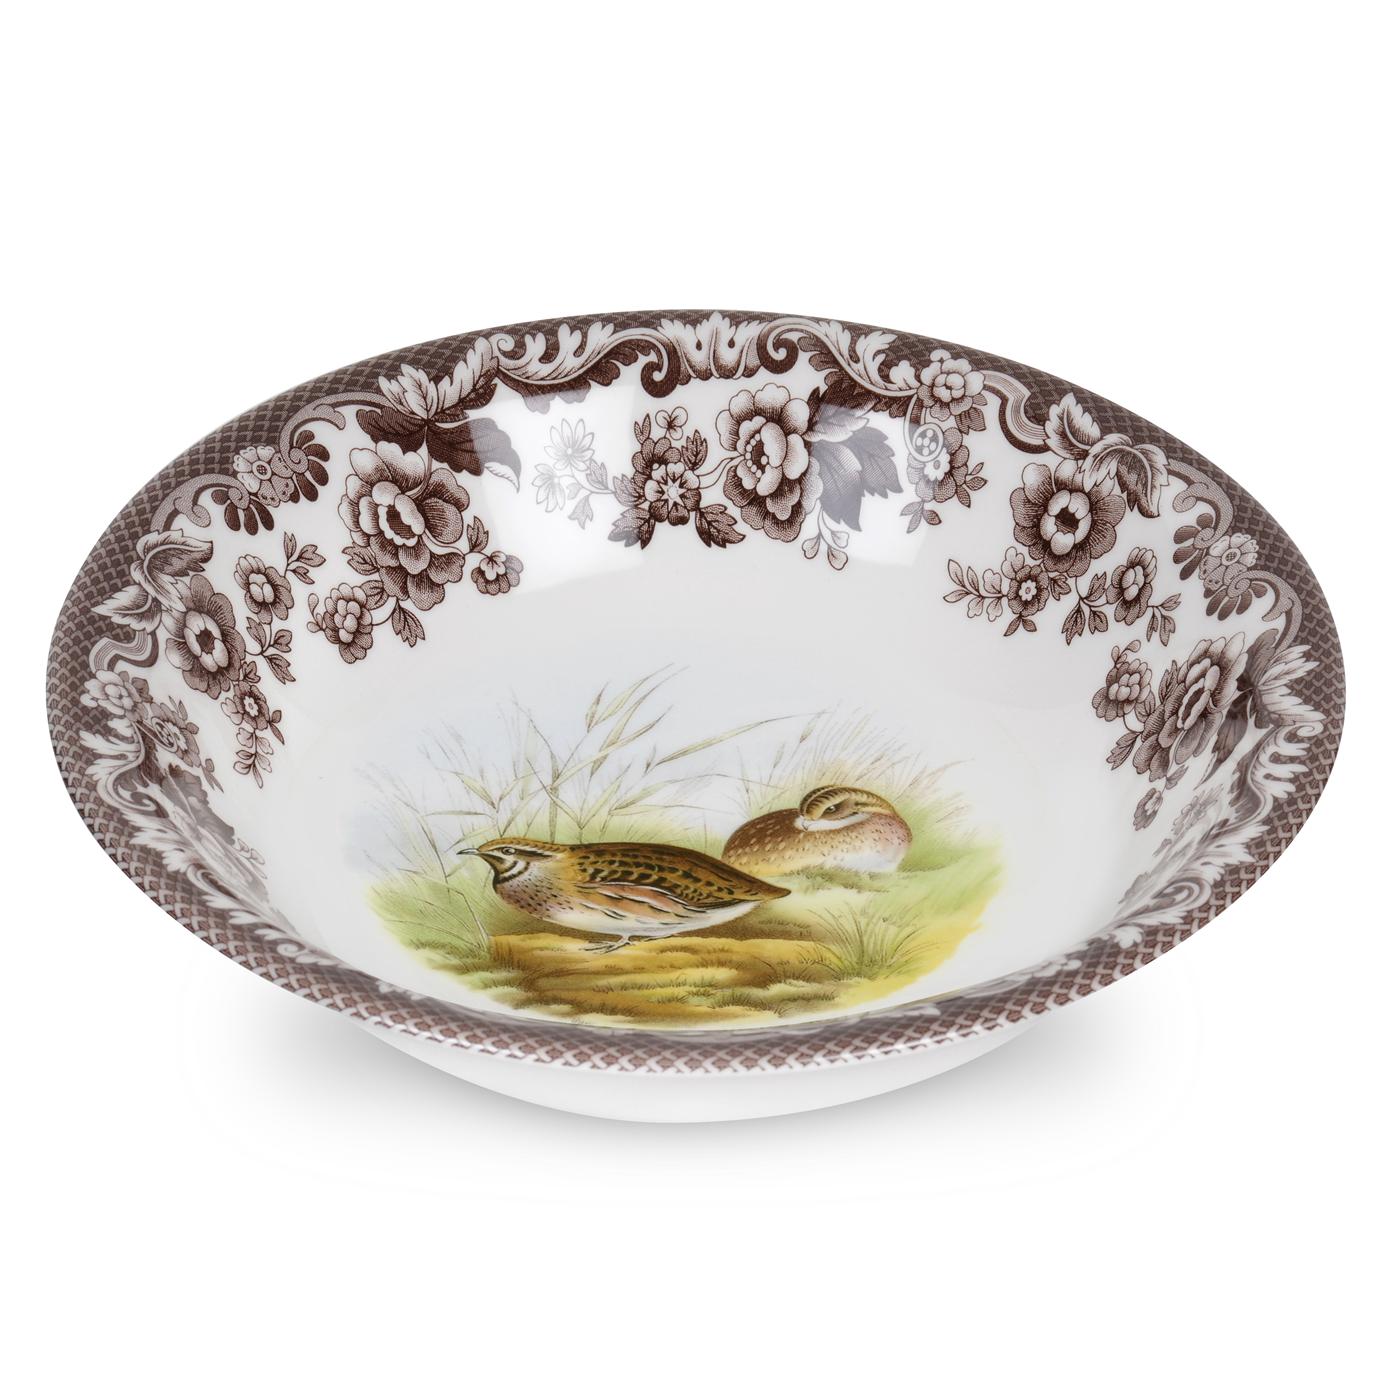 Woodland Ascot Cereal Bowl 8 Inch, Quail image number null